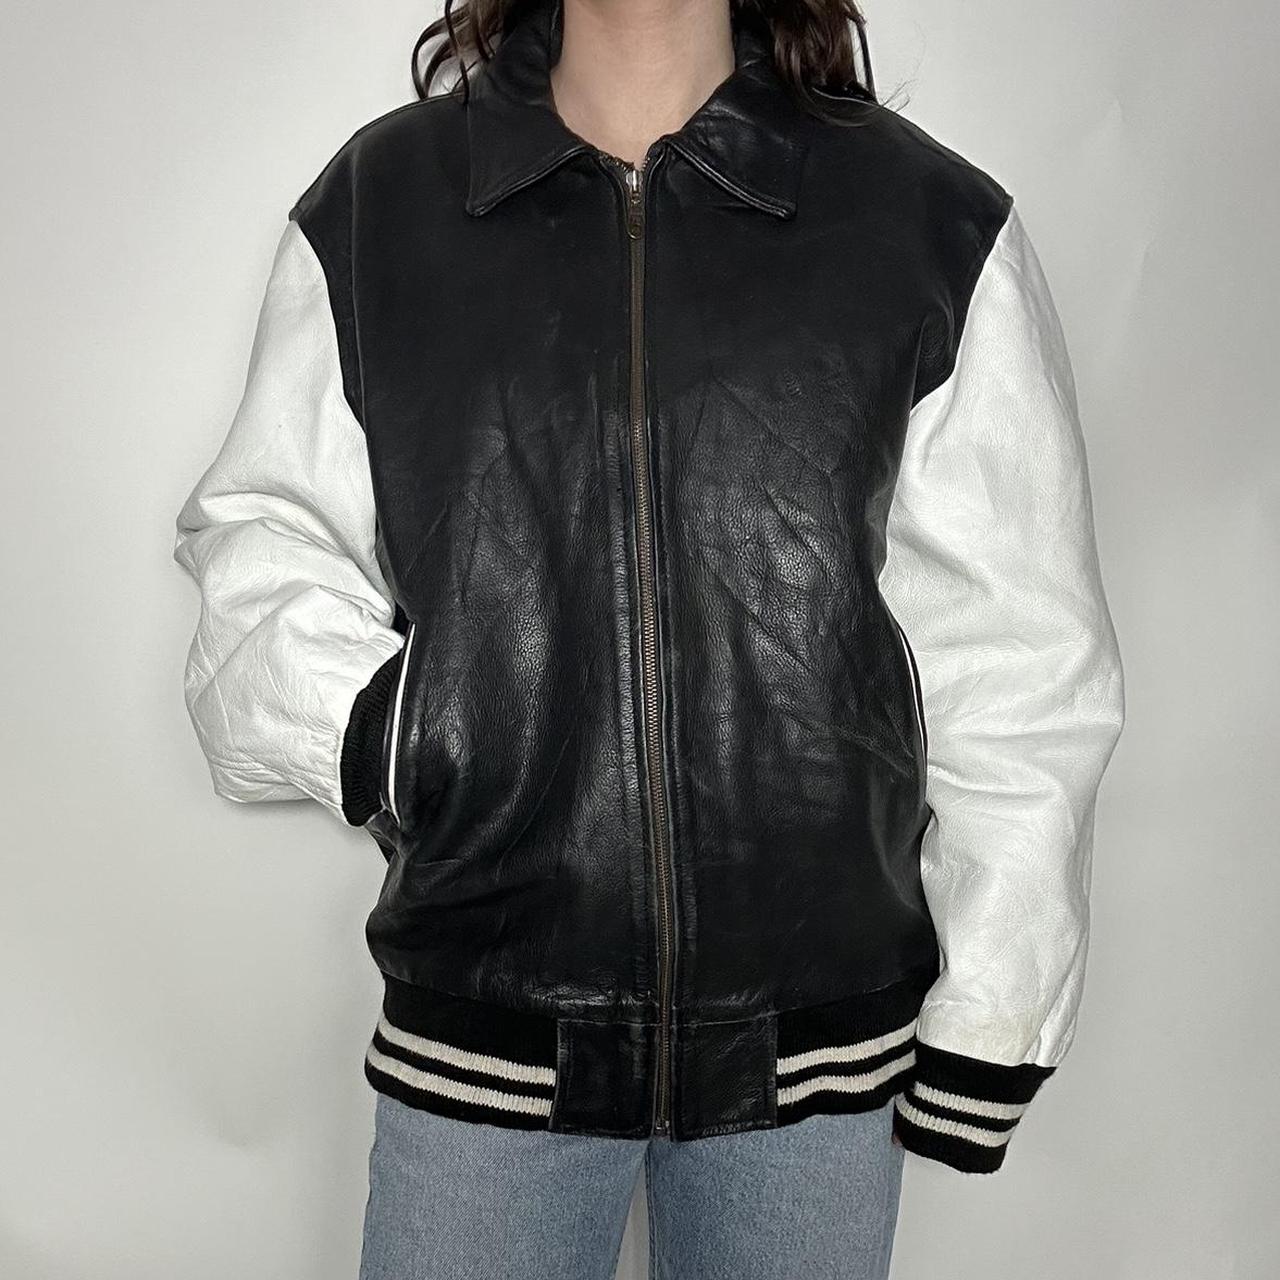 Vintage 90s leather bomber jacket with striped cuffs and collar and white sleeves